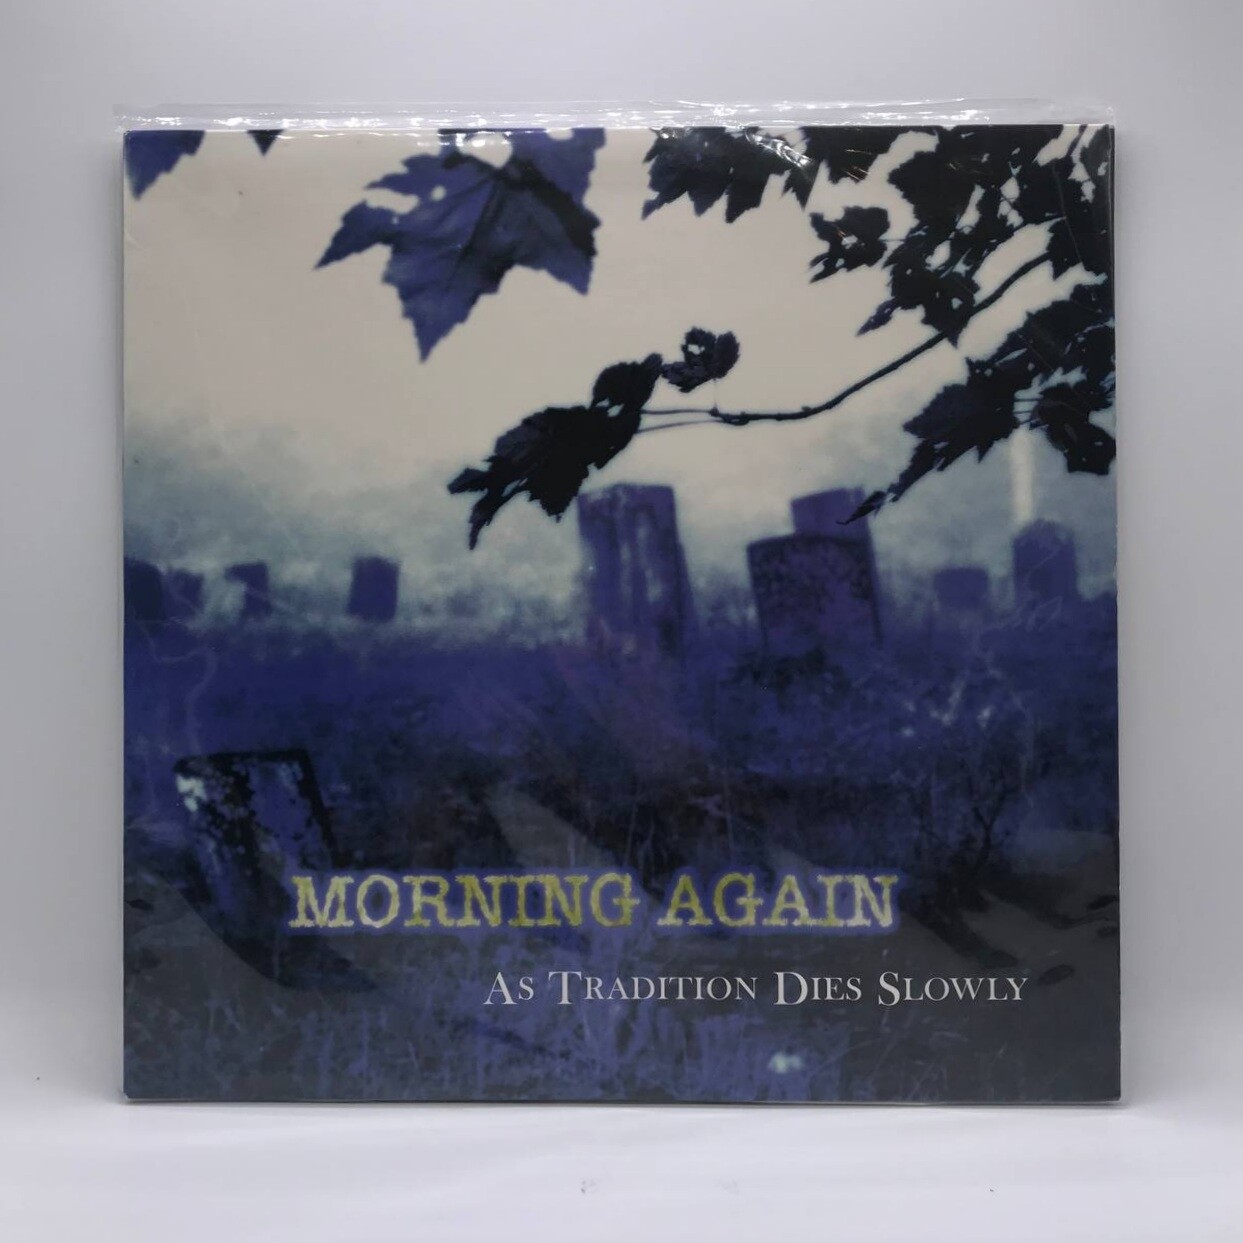 [USED] MORNING AGAIN -AS TRADITION DIES SLOWLY- LP